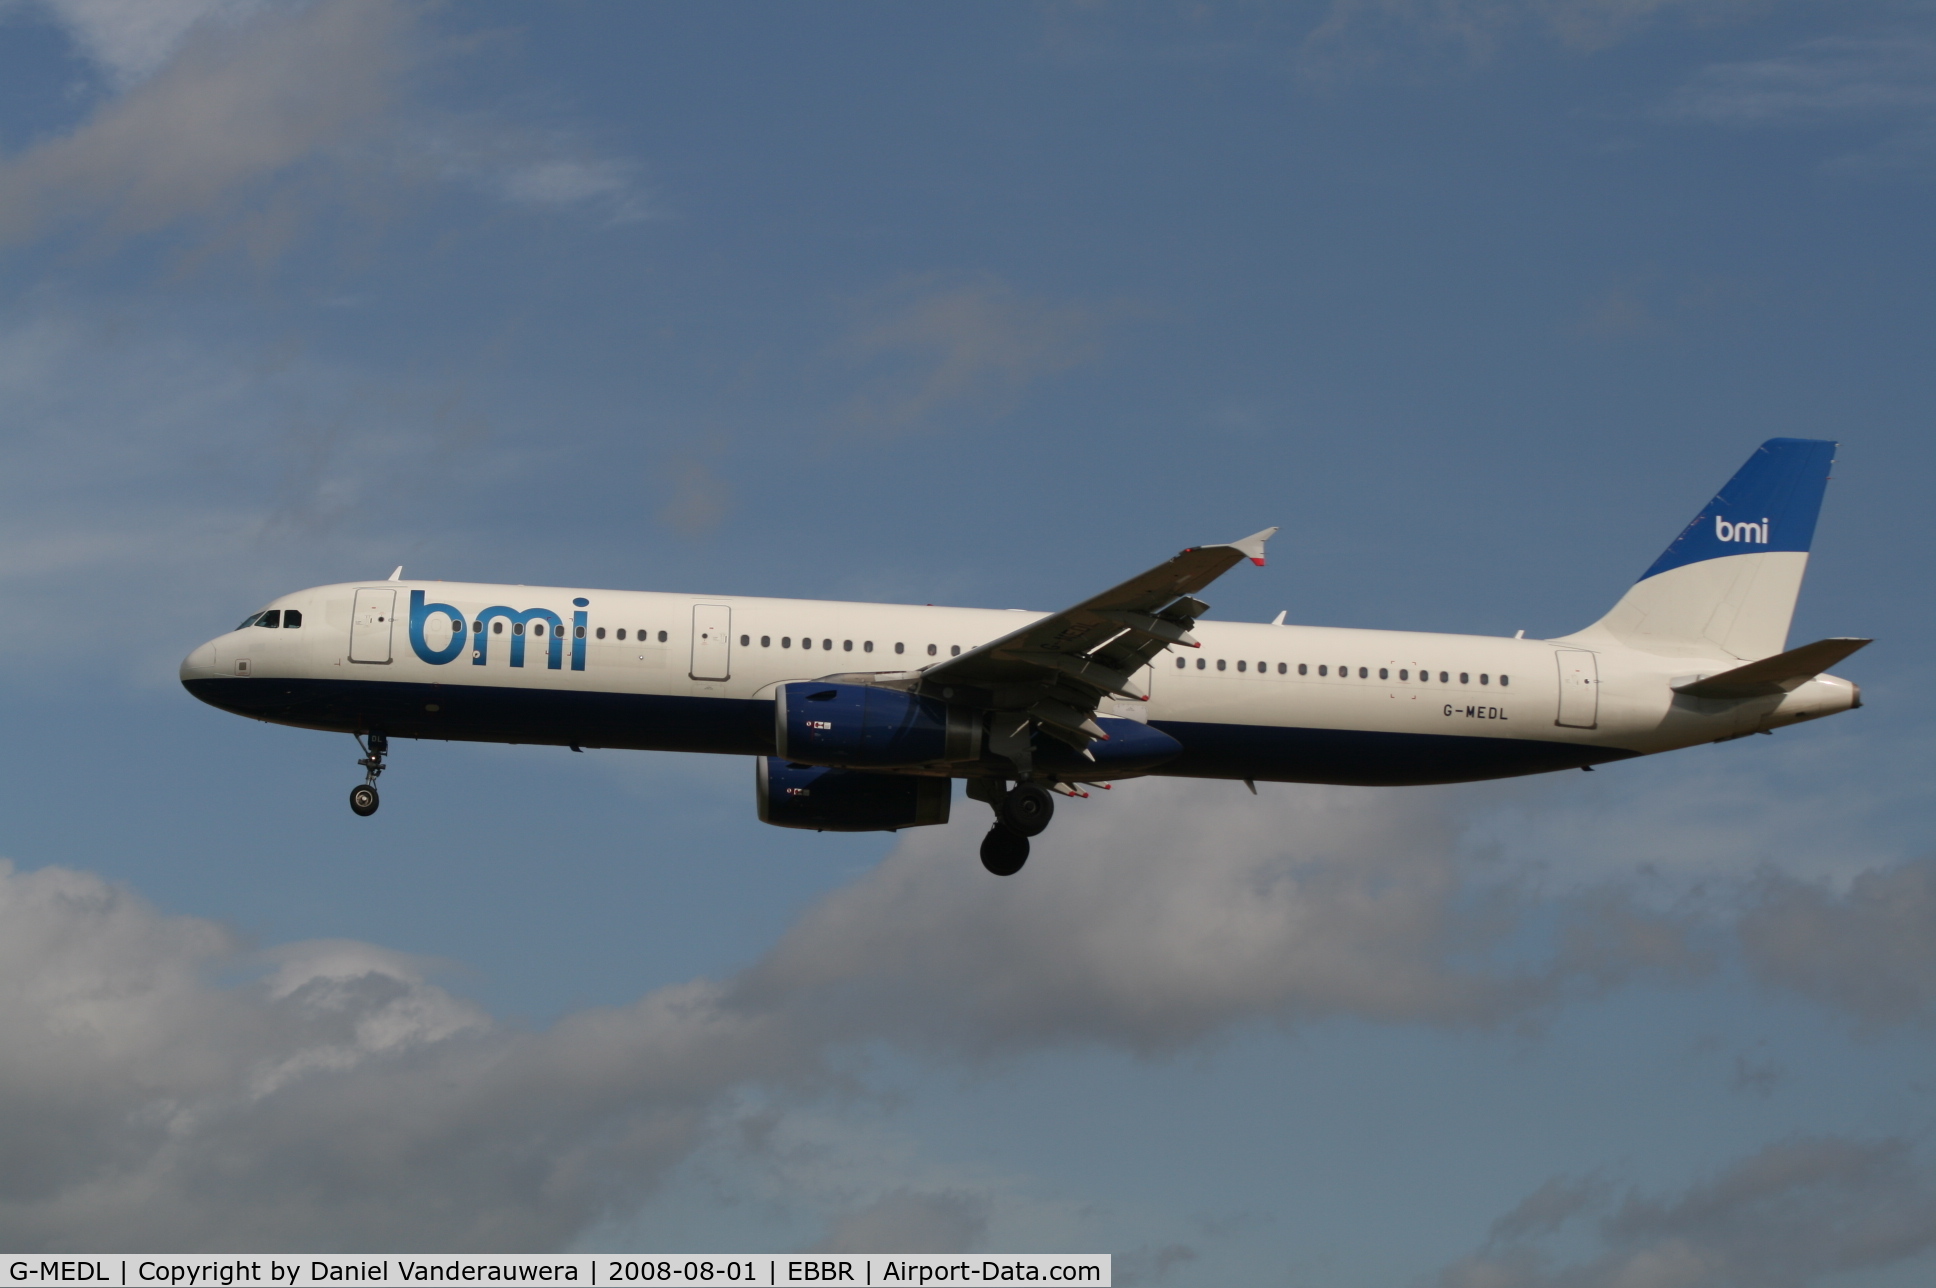 G-MEDL, 2006 Airbus A321-231 C/N 2653, arrival of flight BD145 to rwy 25L